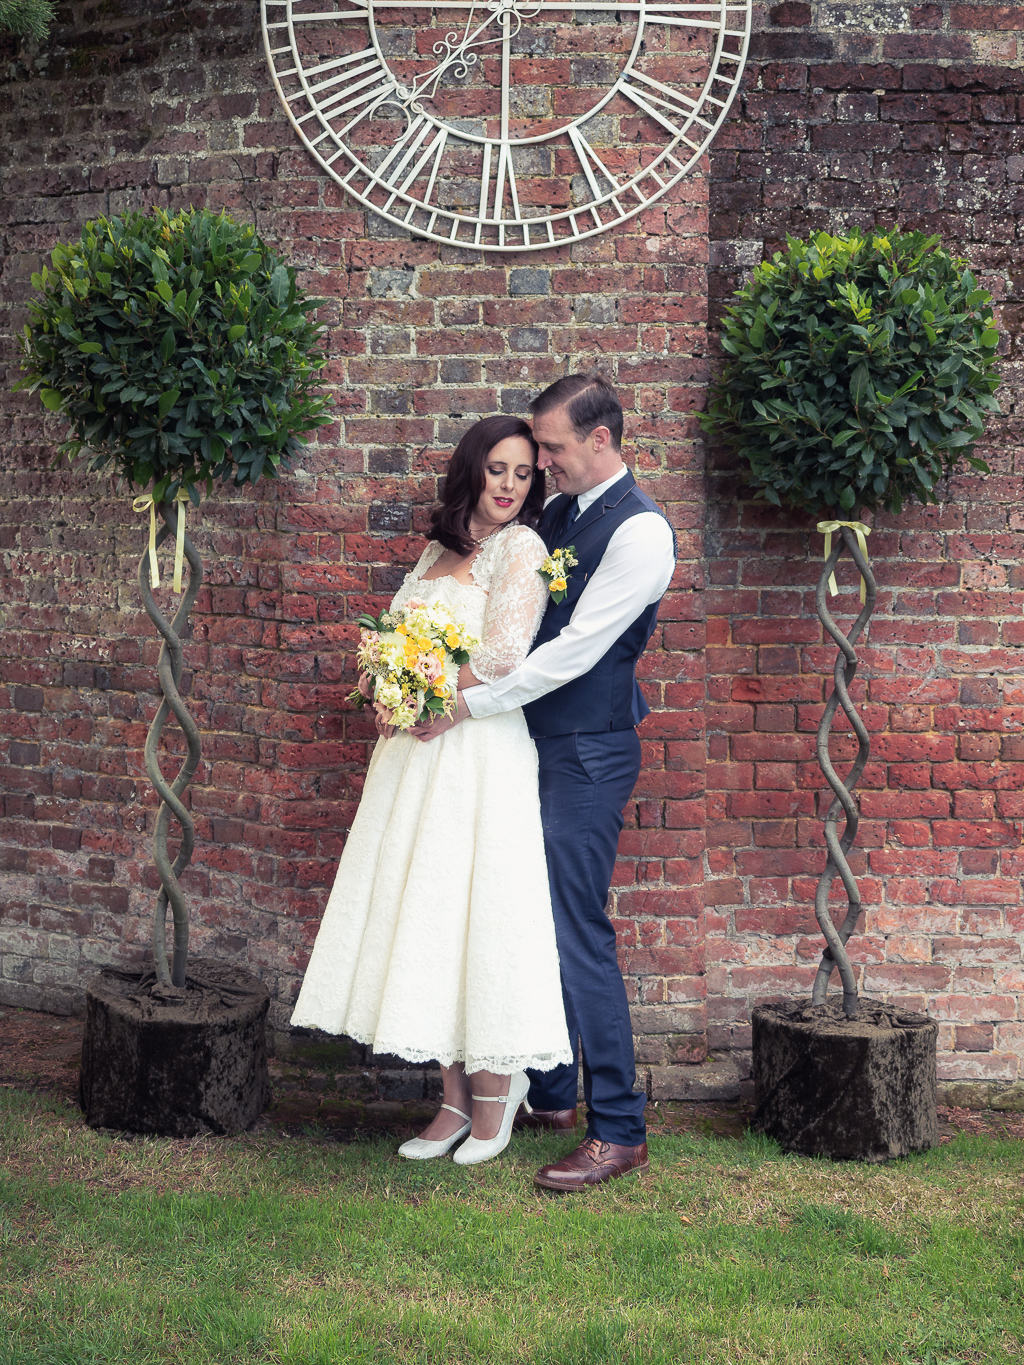 Traditional vintage styled wedding photoshoot at The Orangery Suite, photographer credit Dom Brenton Photography (13)